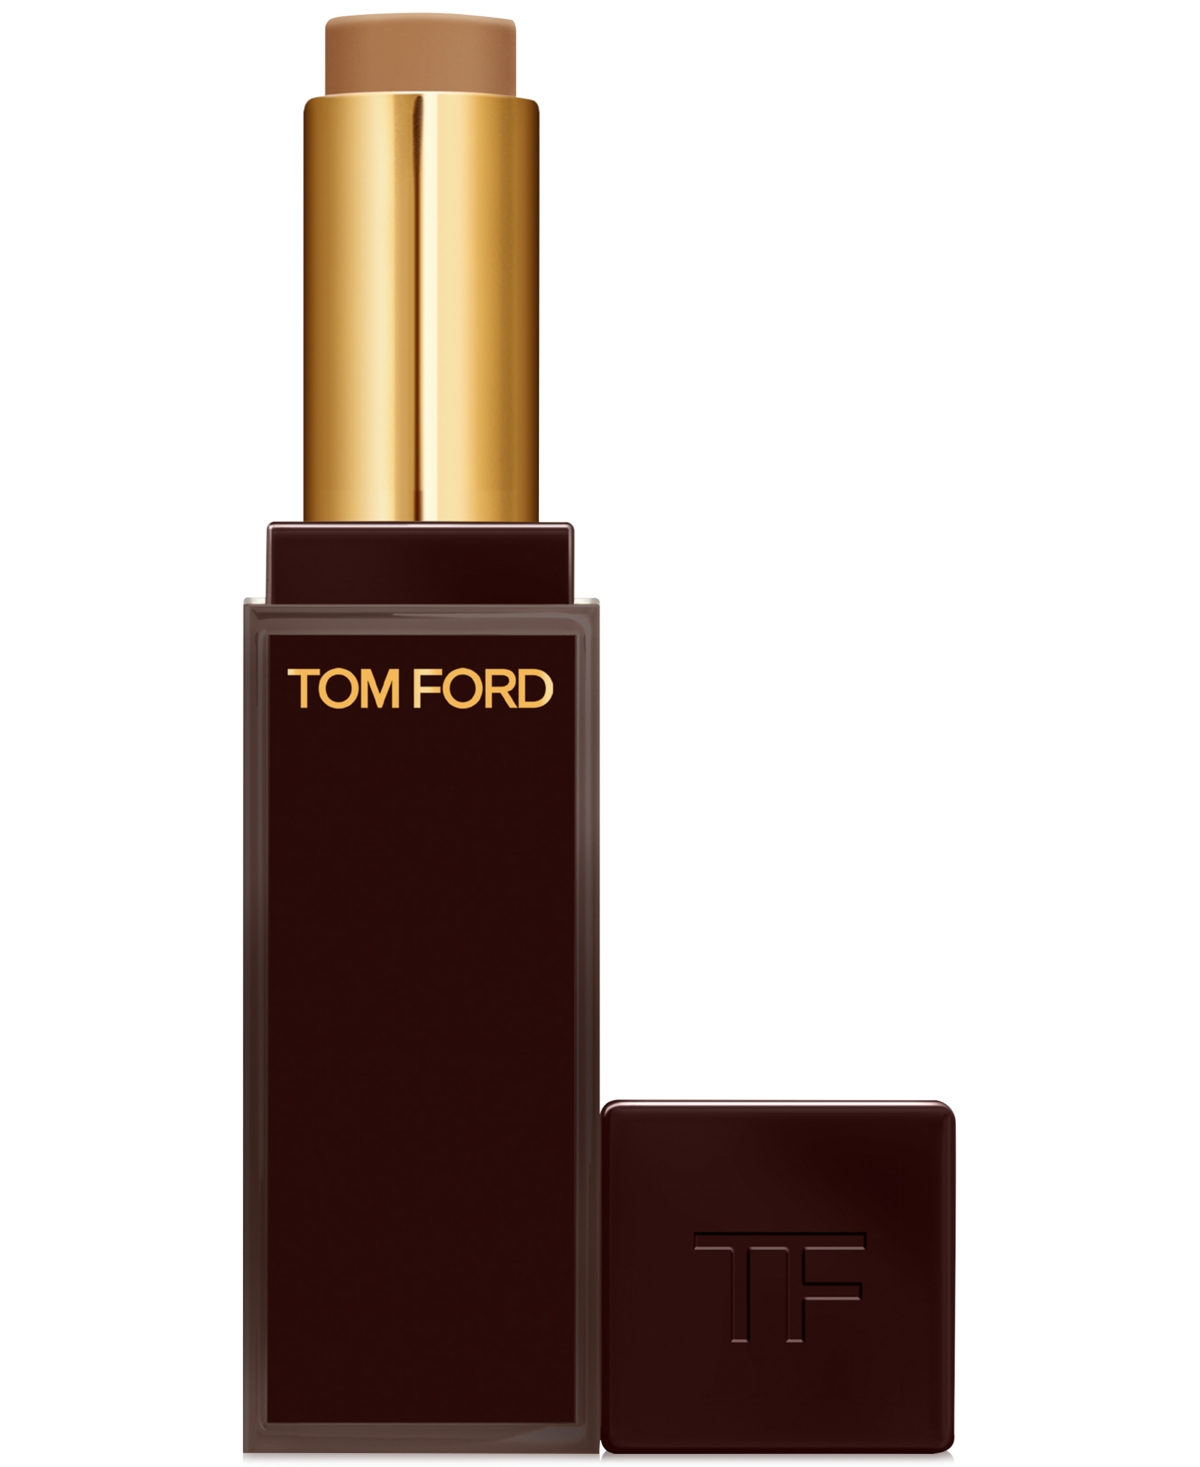 Tom Ford Traceless Soft Matte Concealer In N Almond (deep Skin With Neutral Underto